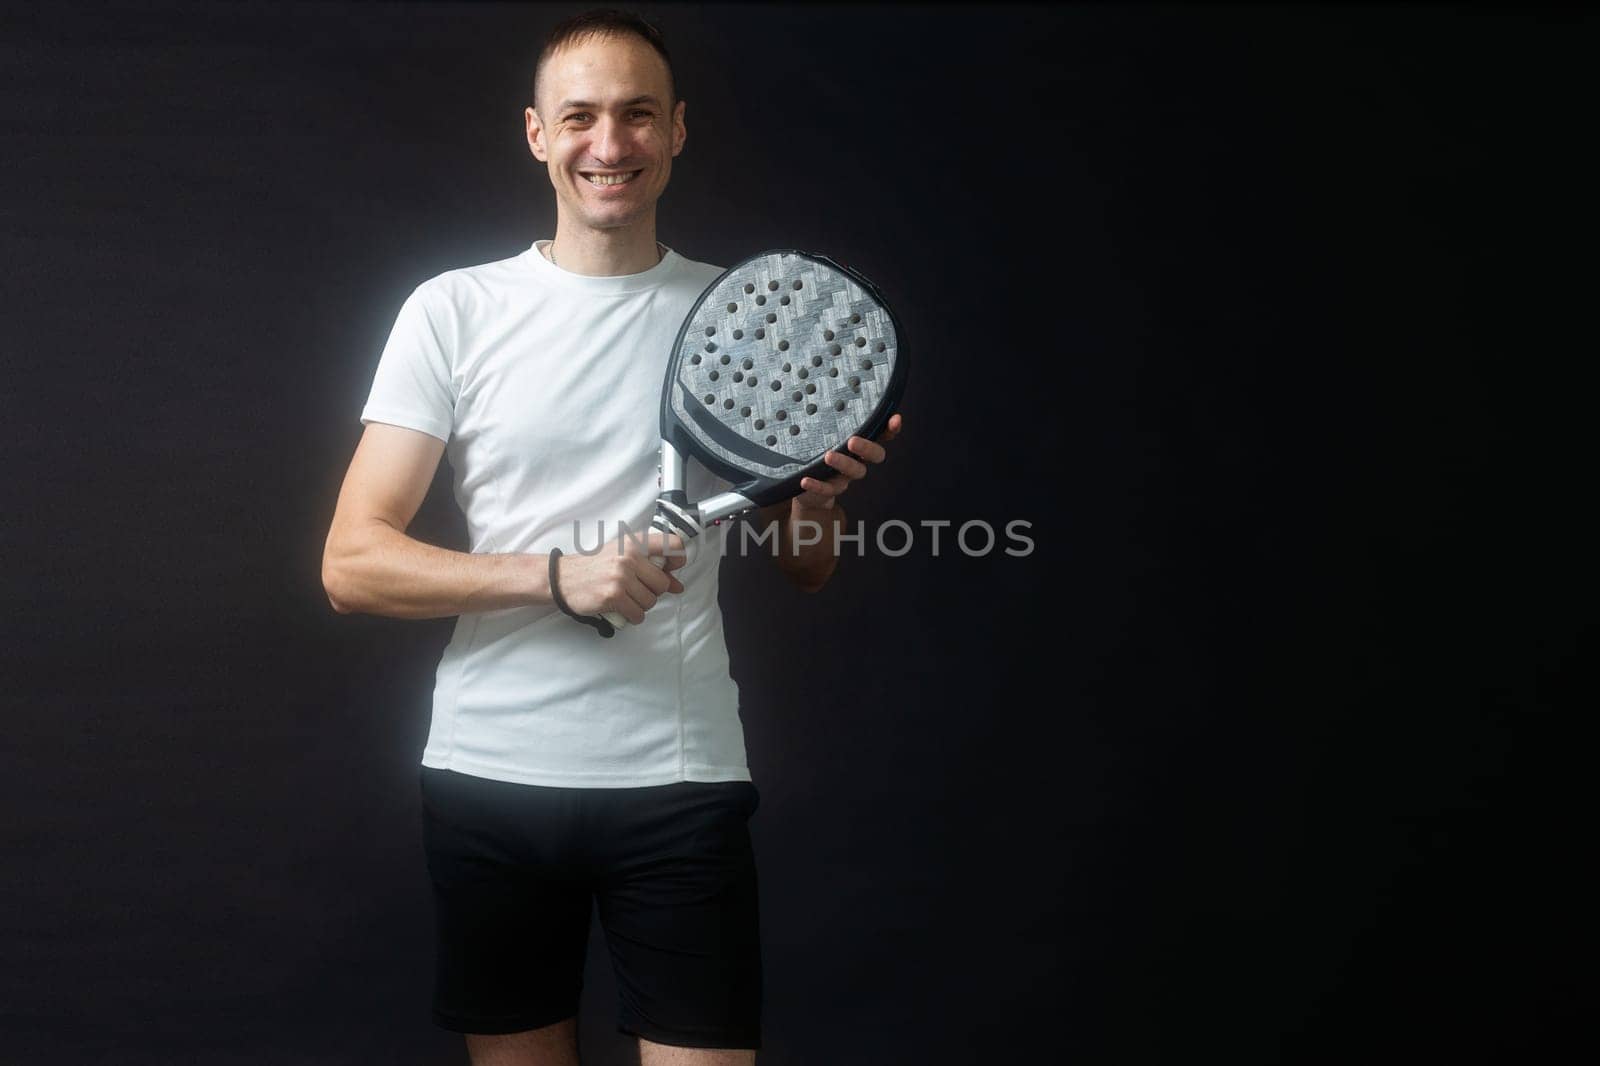 Man ready for paddle tennis serve in studio shot. High quality photo